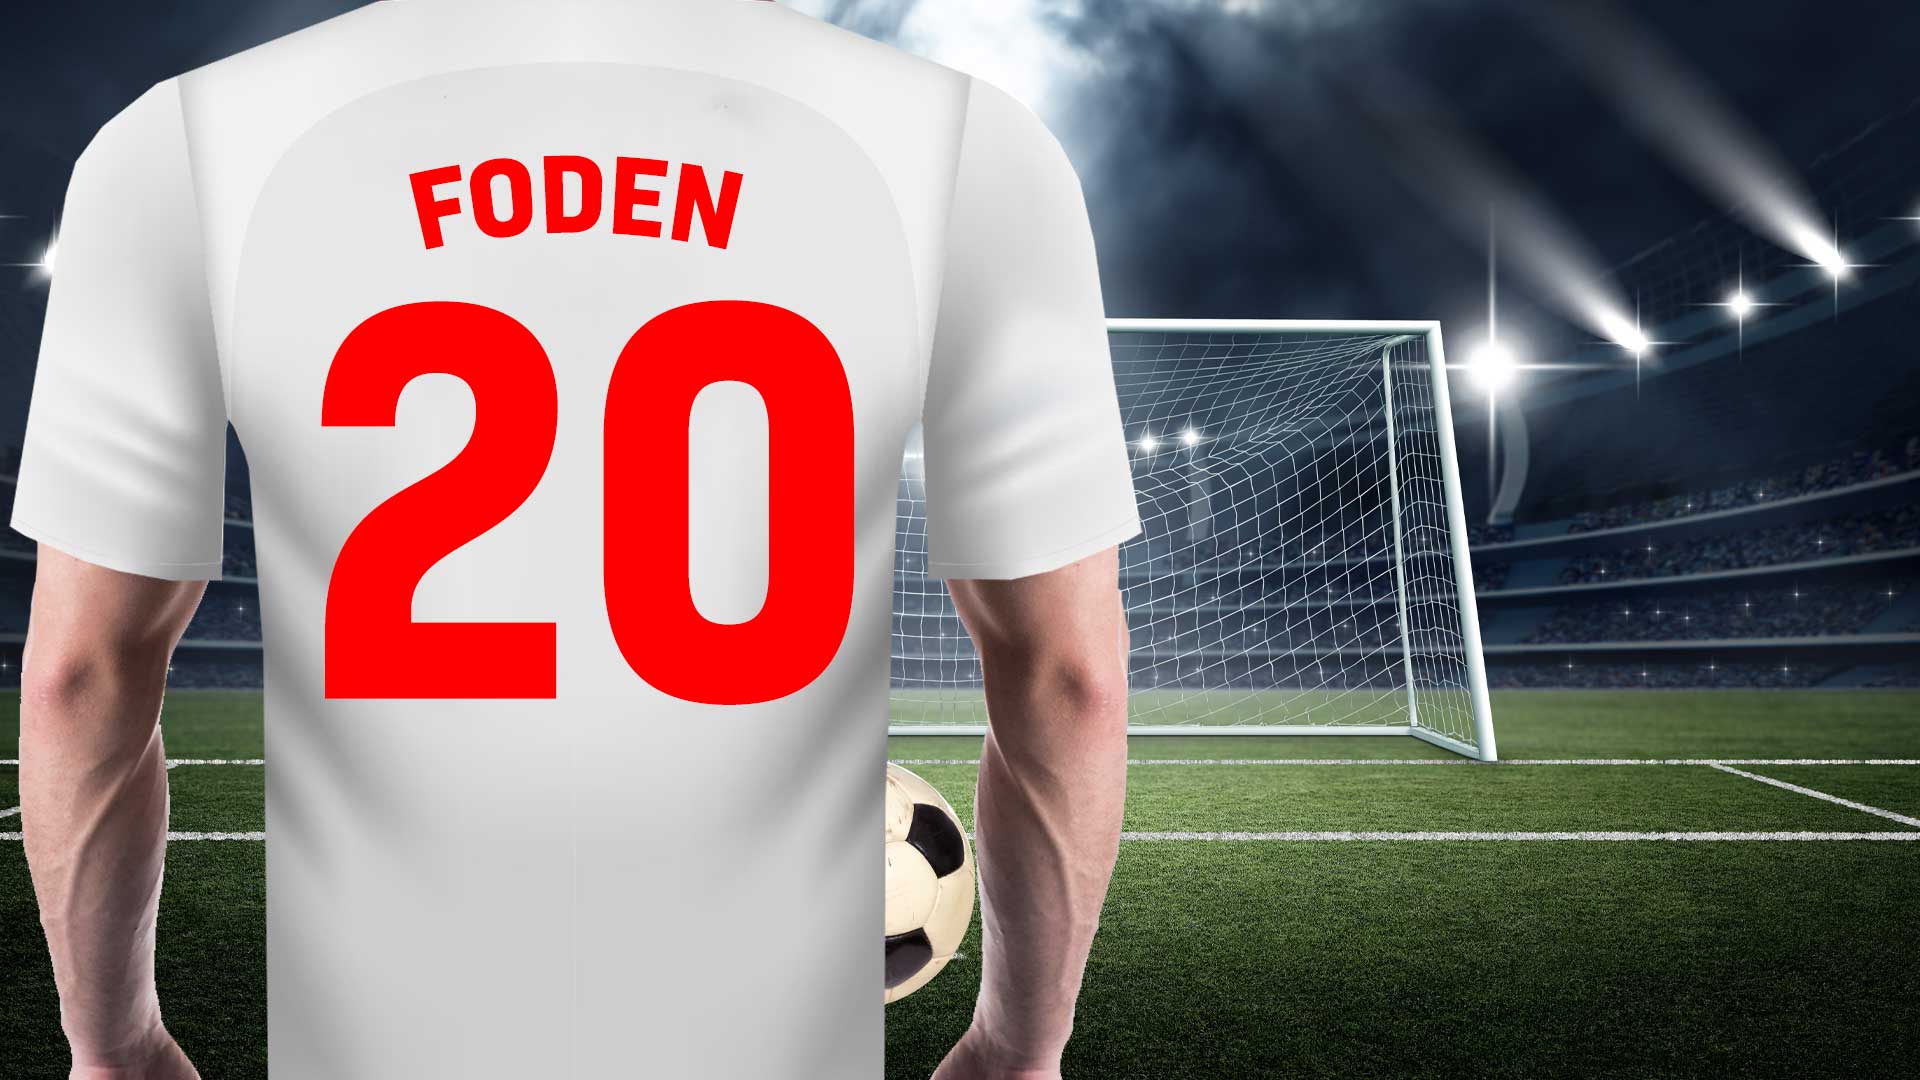 A footballer with Foden's name on the back of their shirt prepares to take a penalty